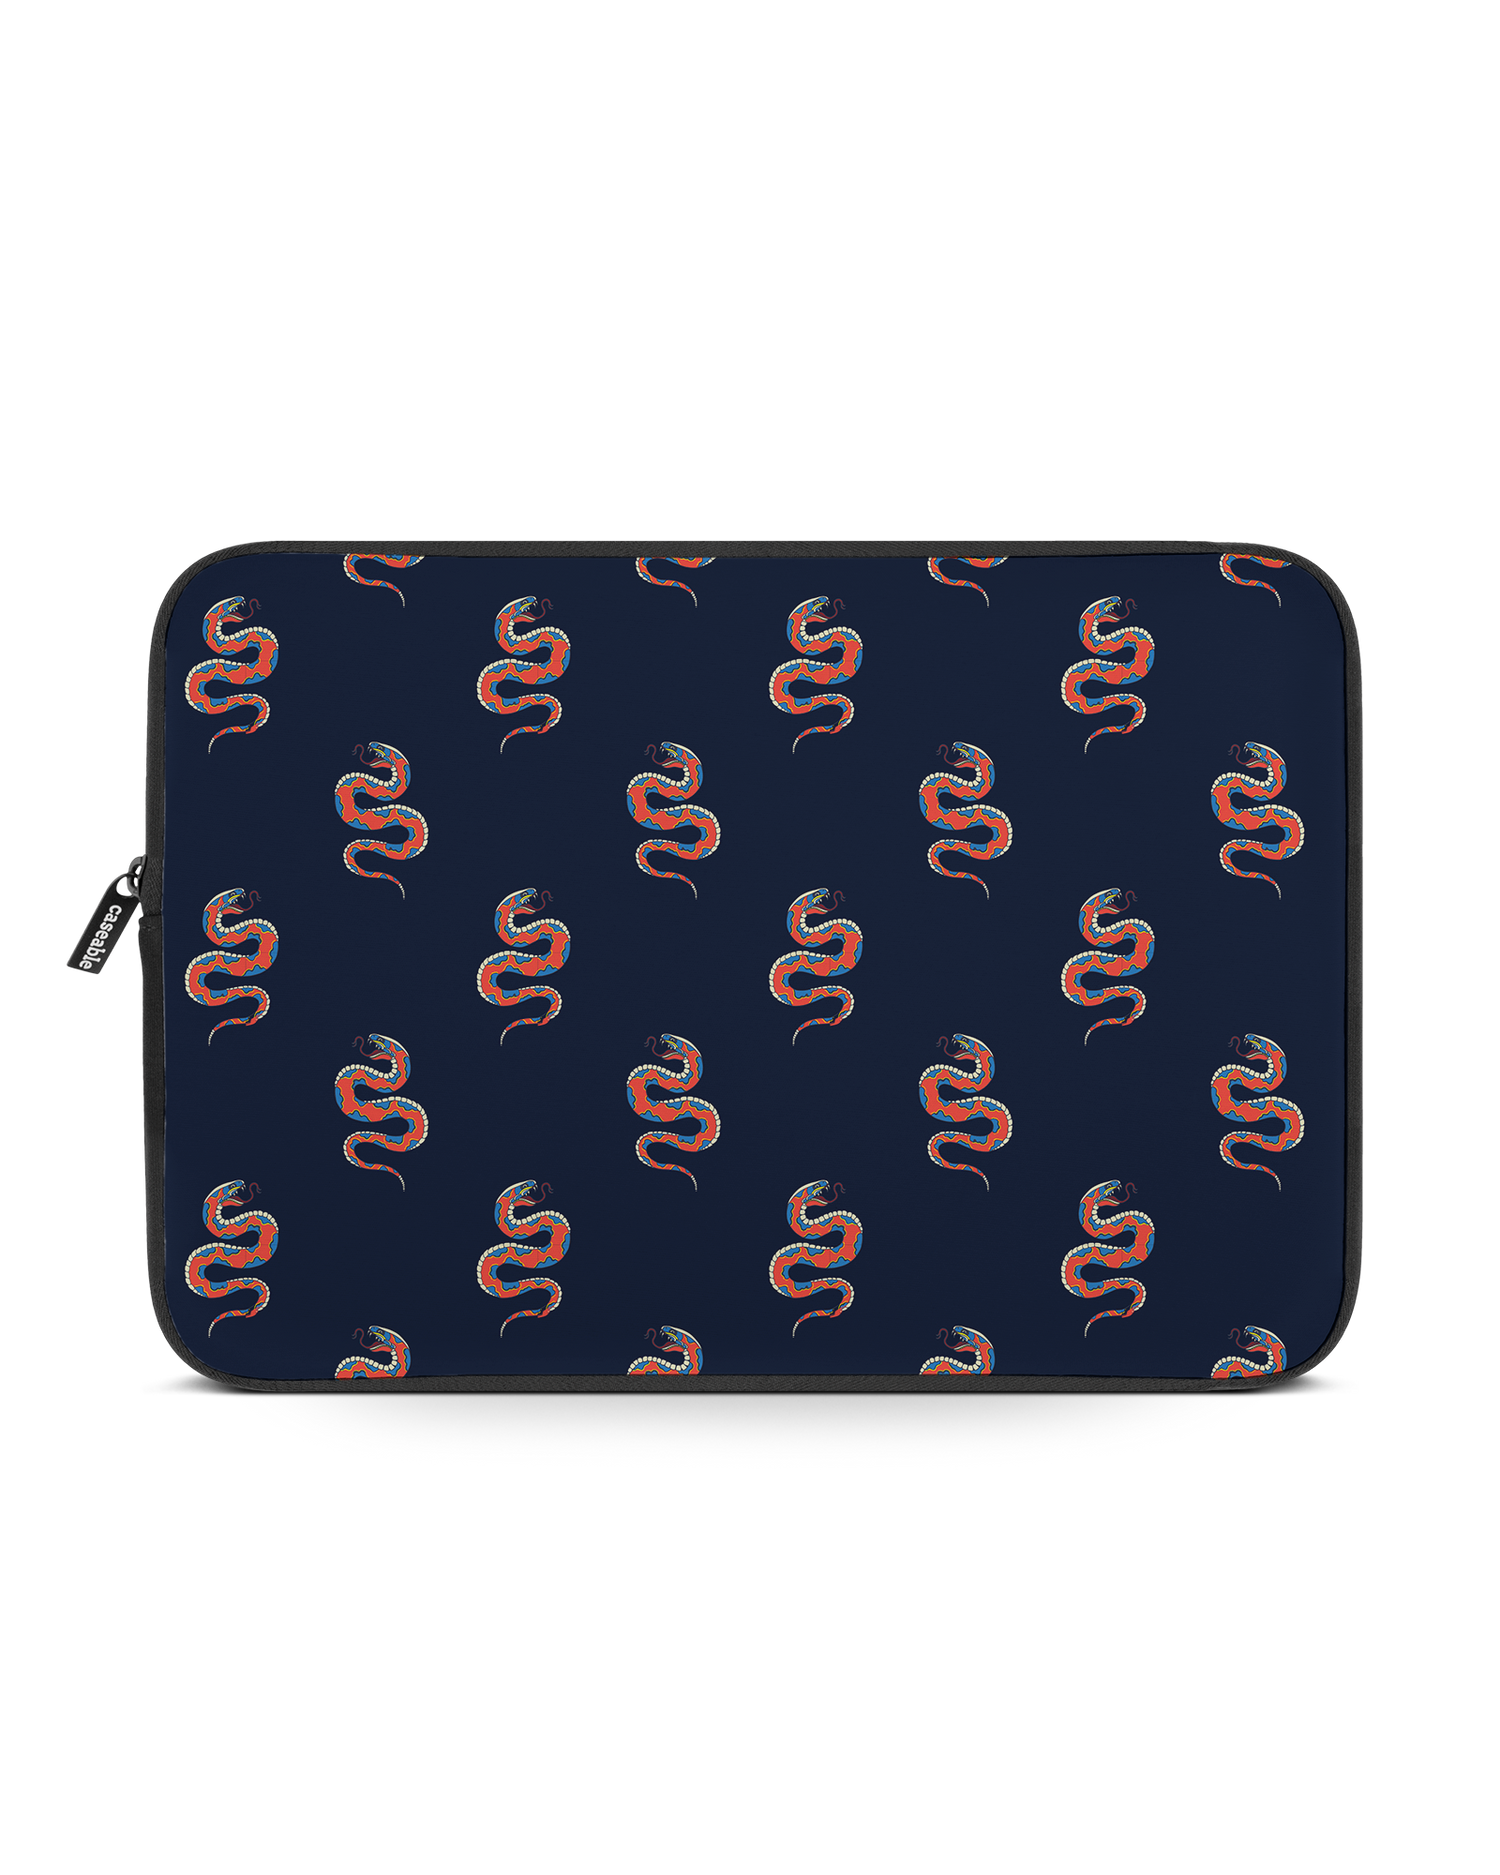 Repeating Snakes Laptop Case 15-16 inch: Front View